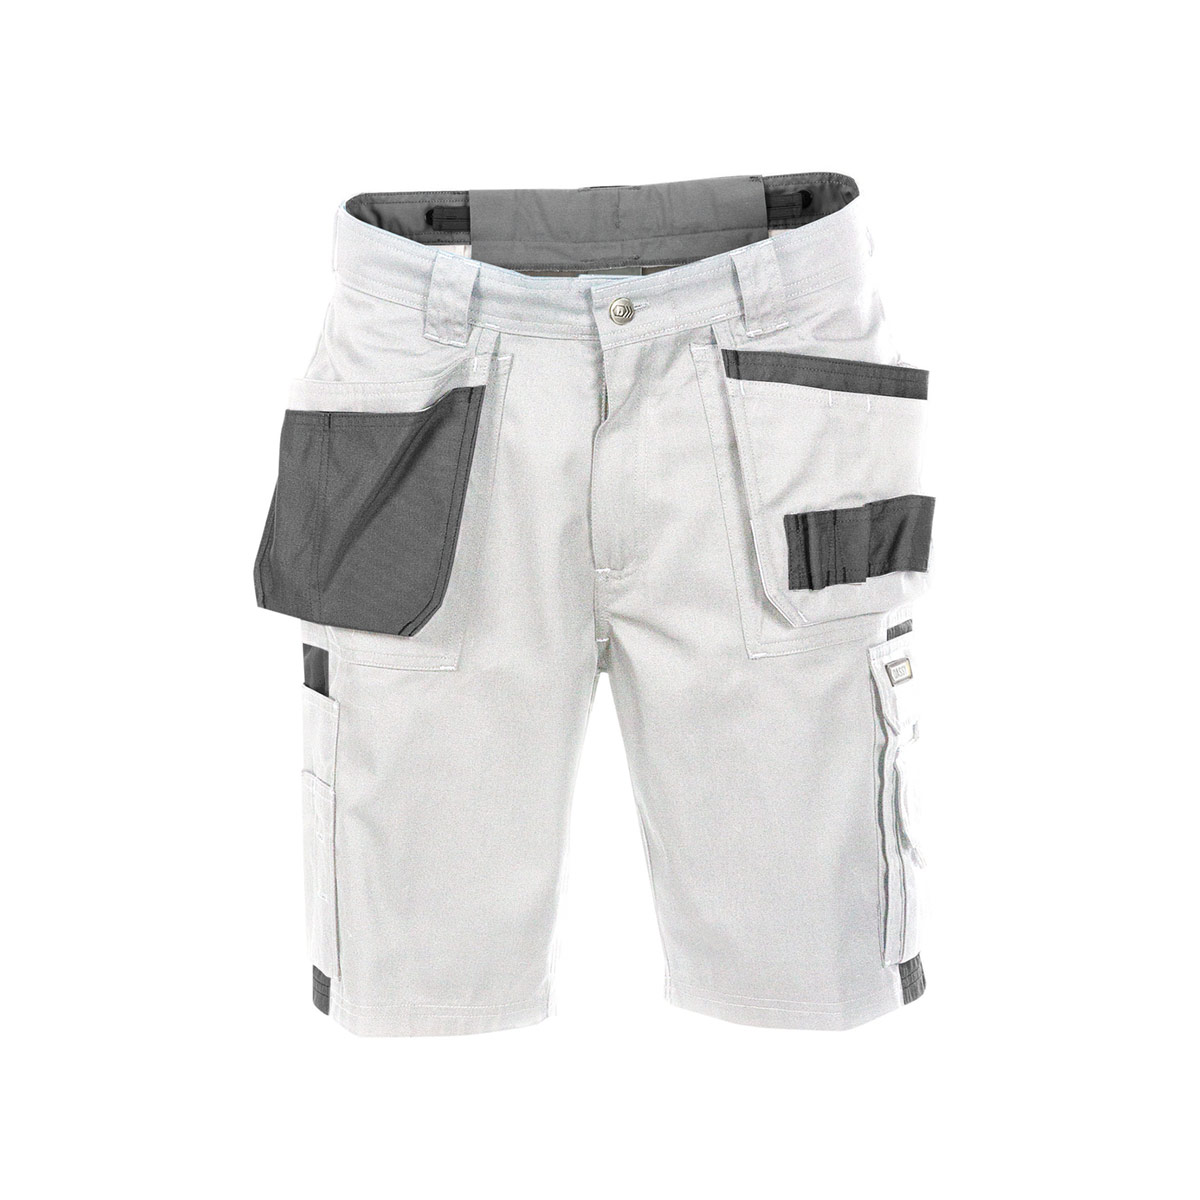 DASSY Monza two-tone work shorts with holster pockets